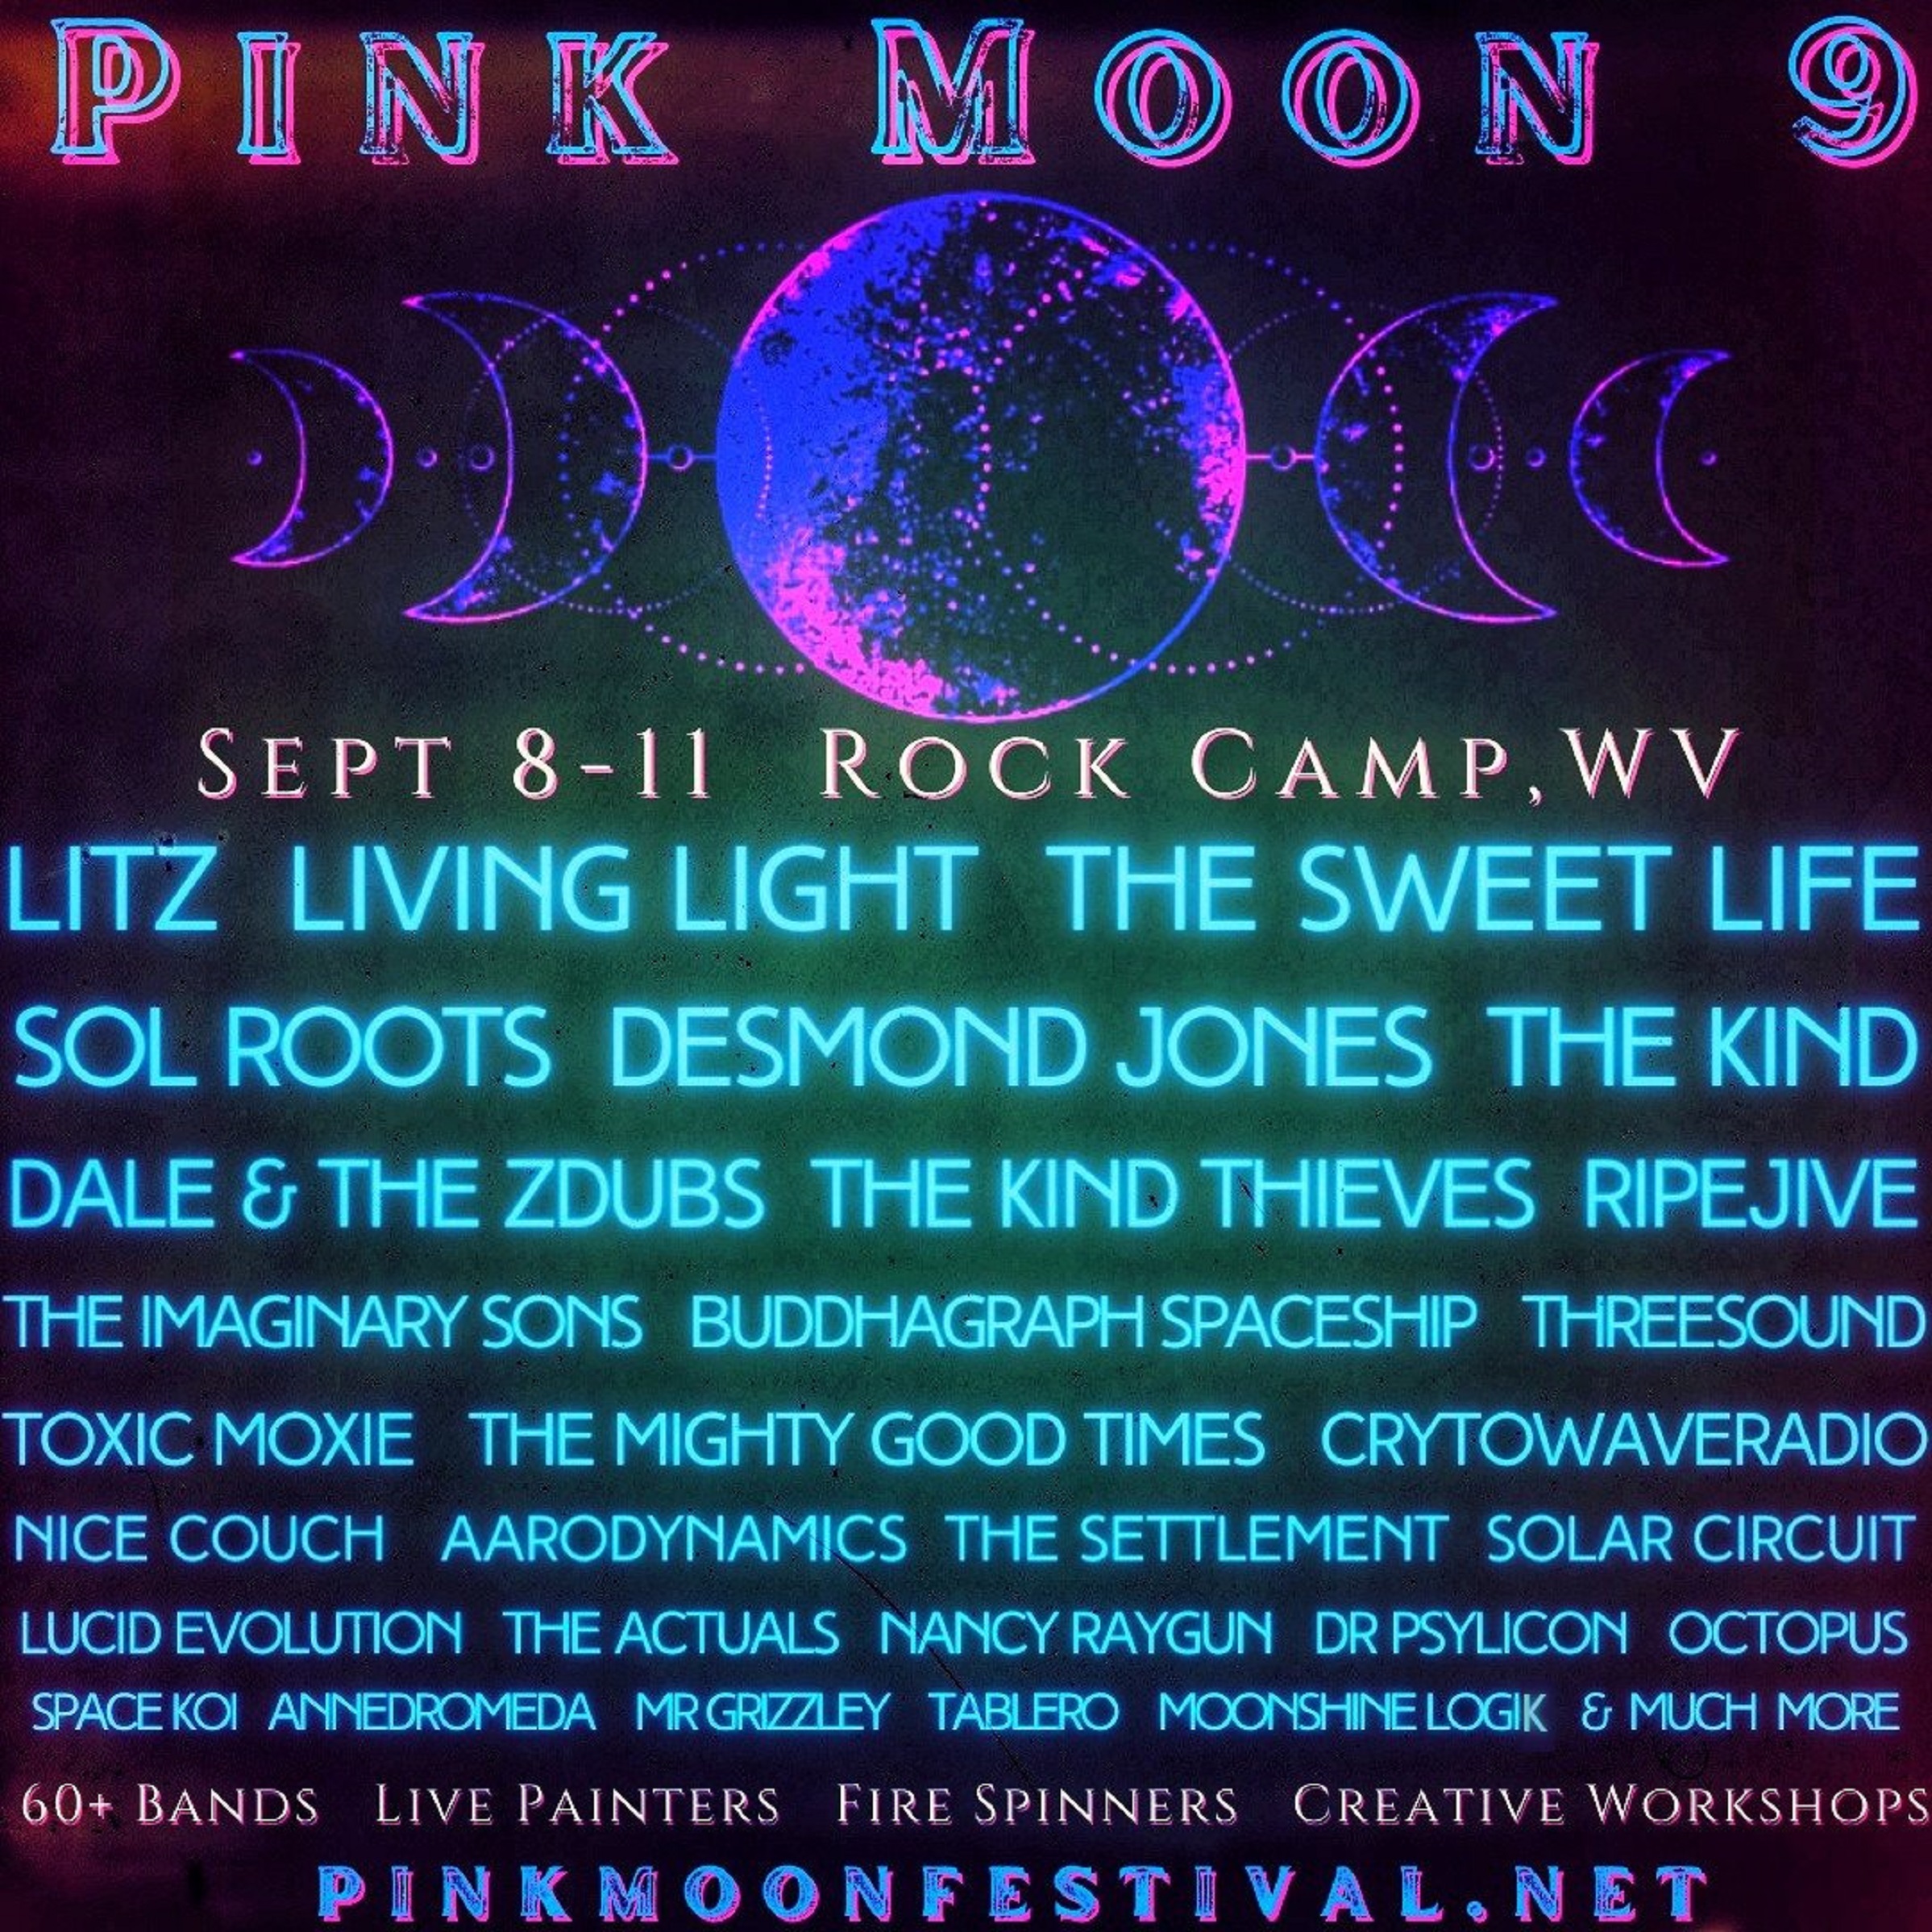 Pink Moon Festival less than one week away